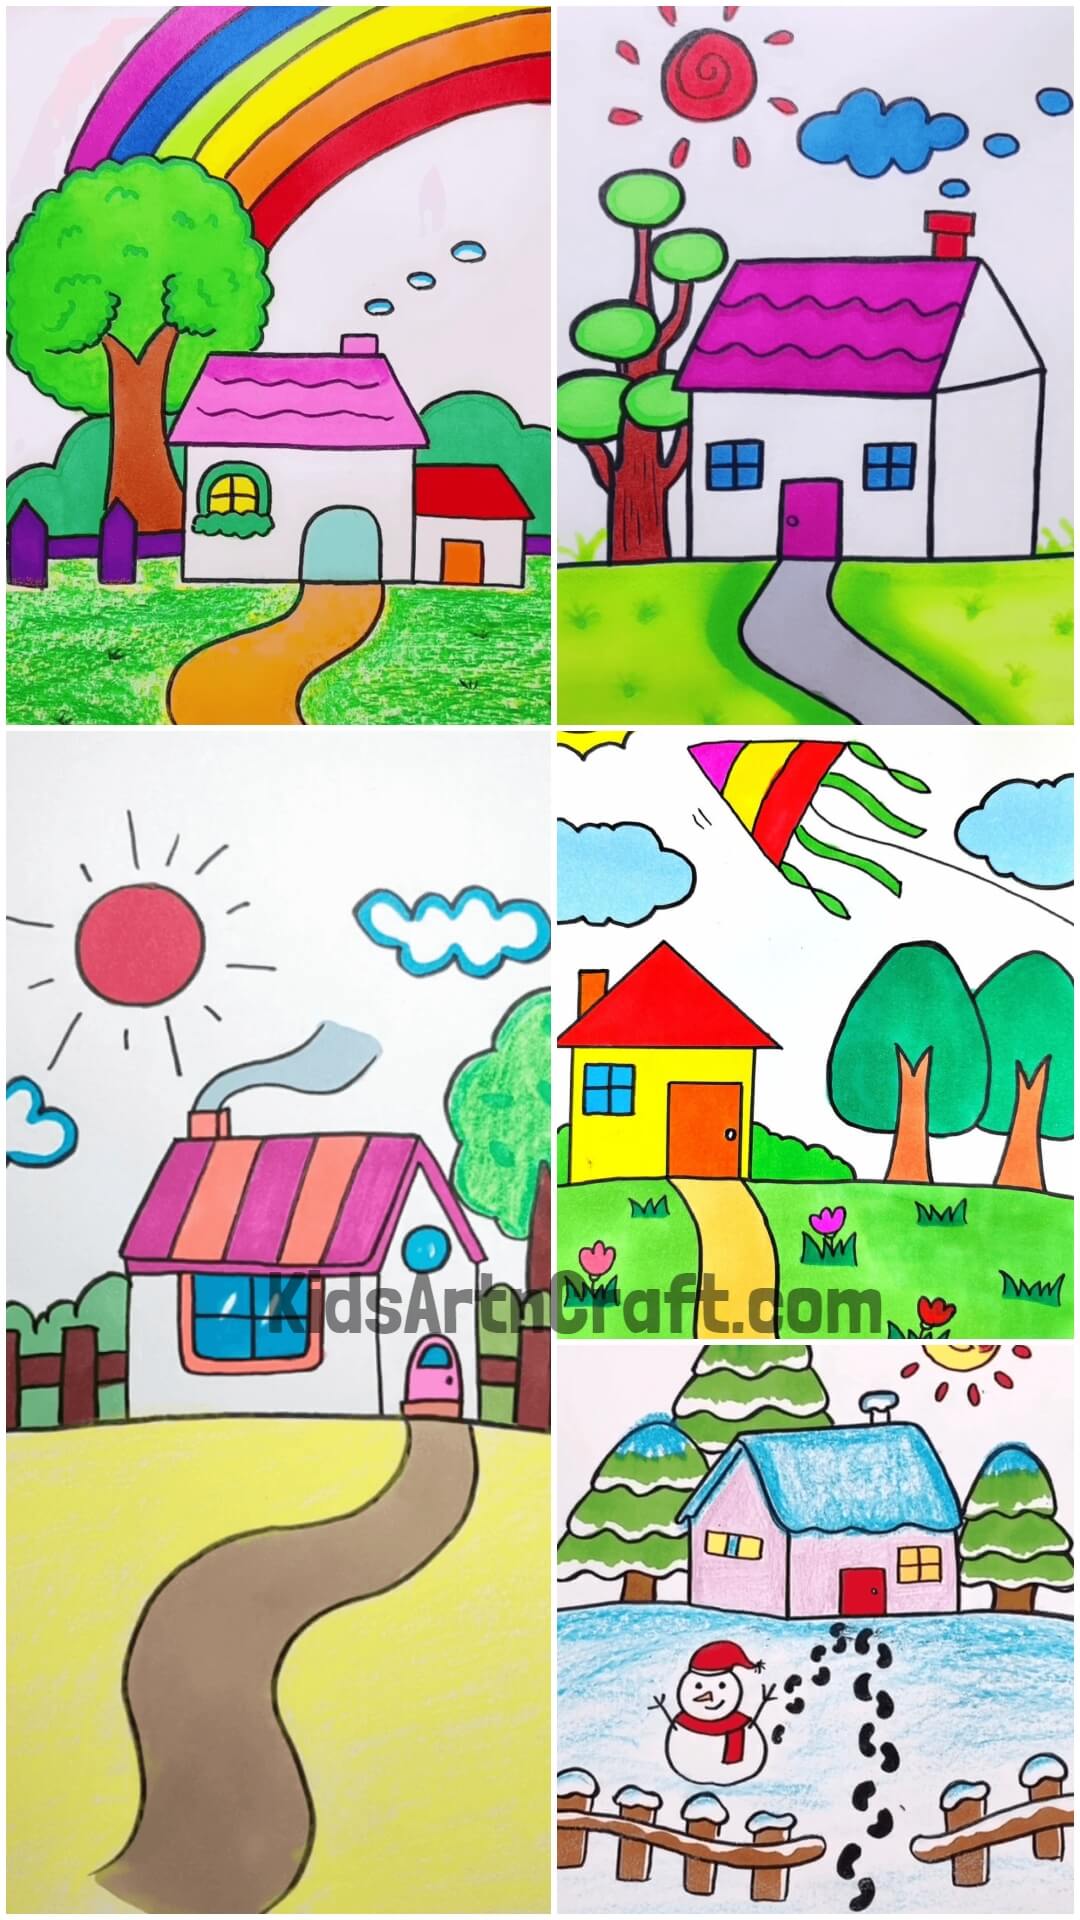 Draw Beautiful Sceneries With Some Vibrant Colors